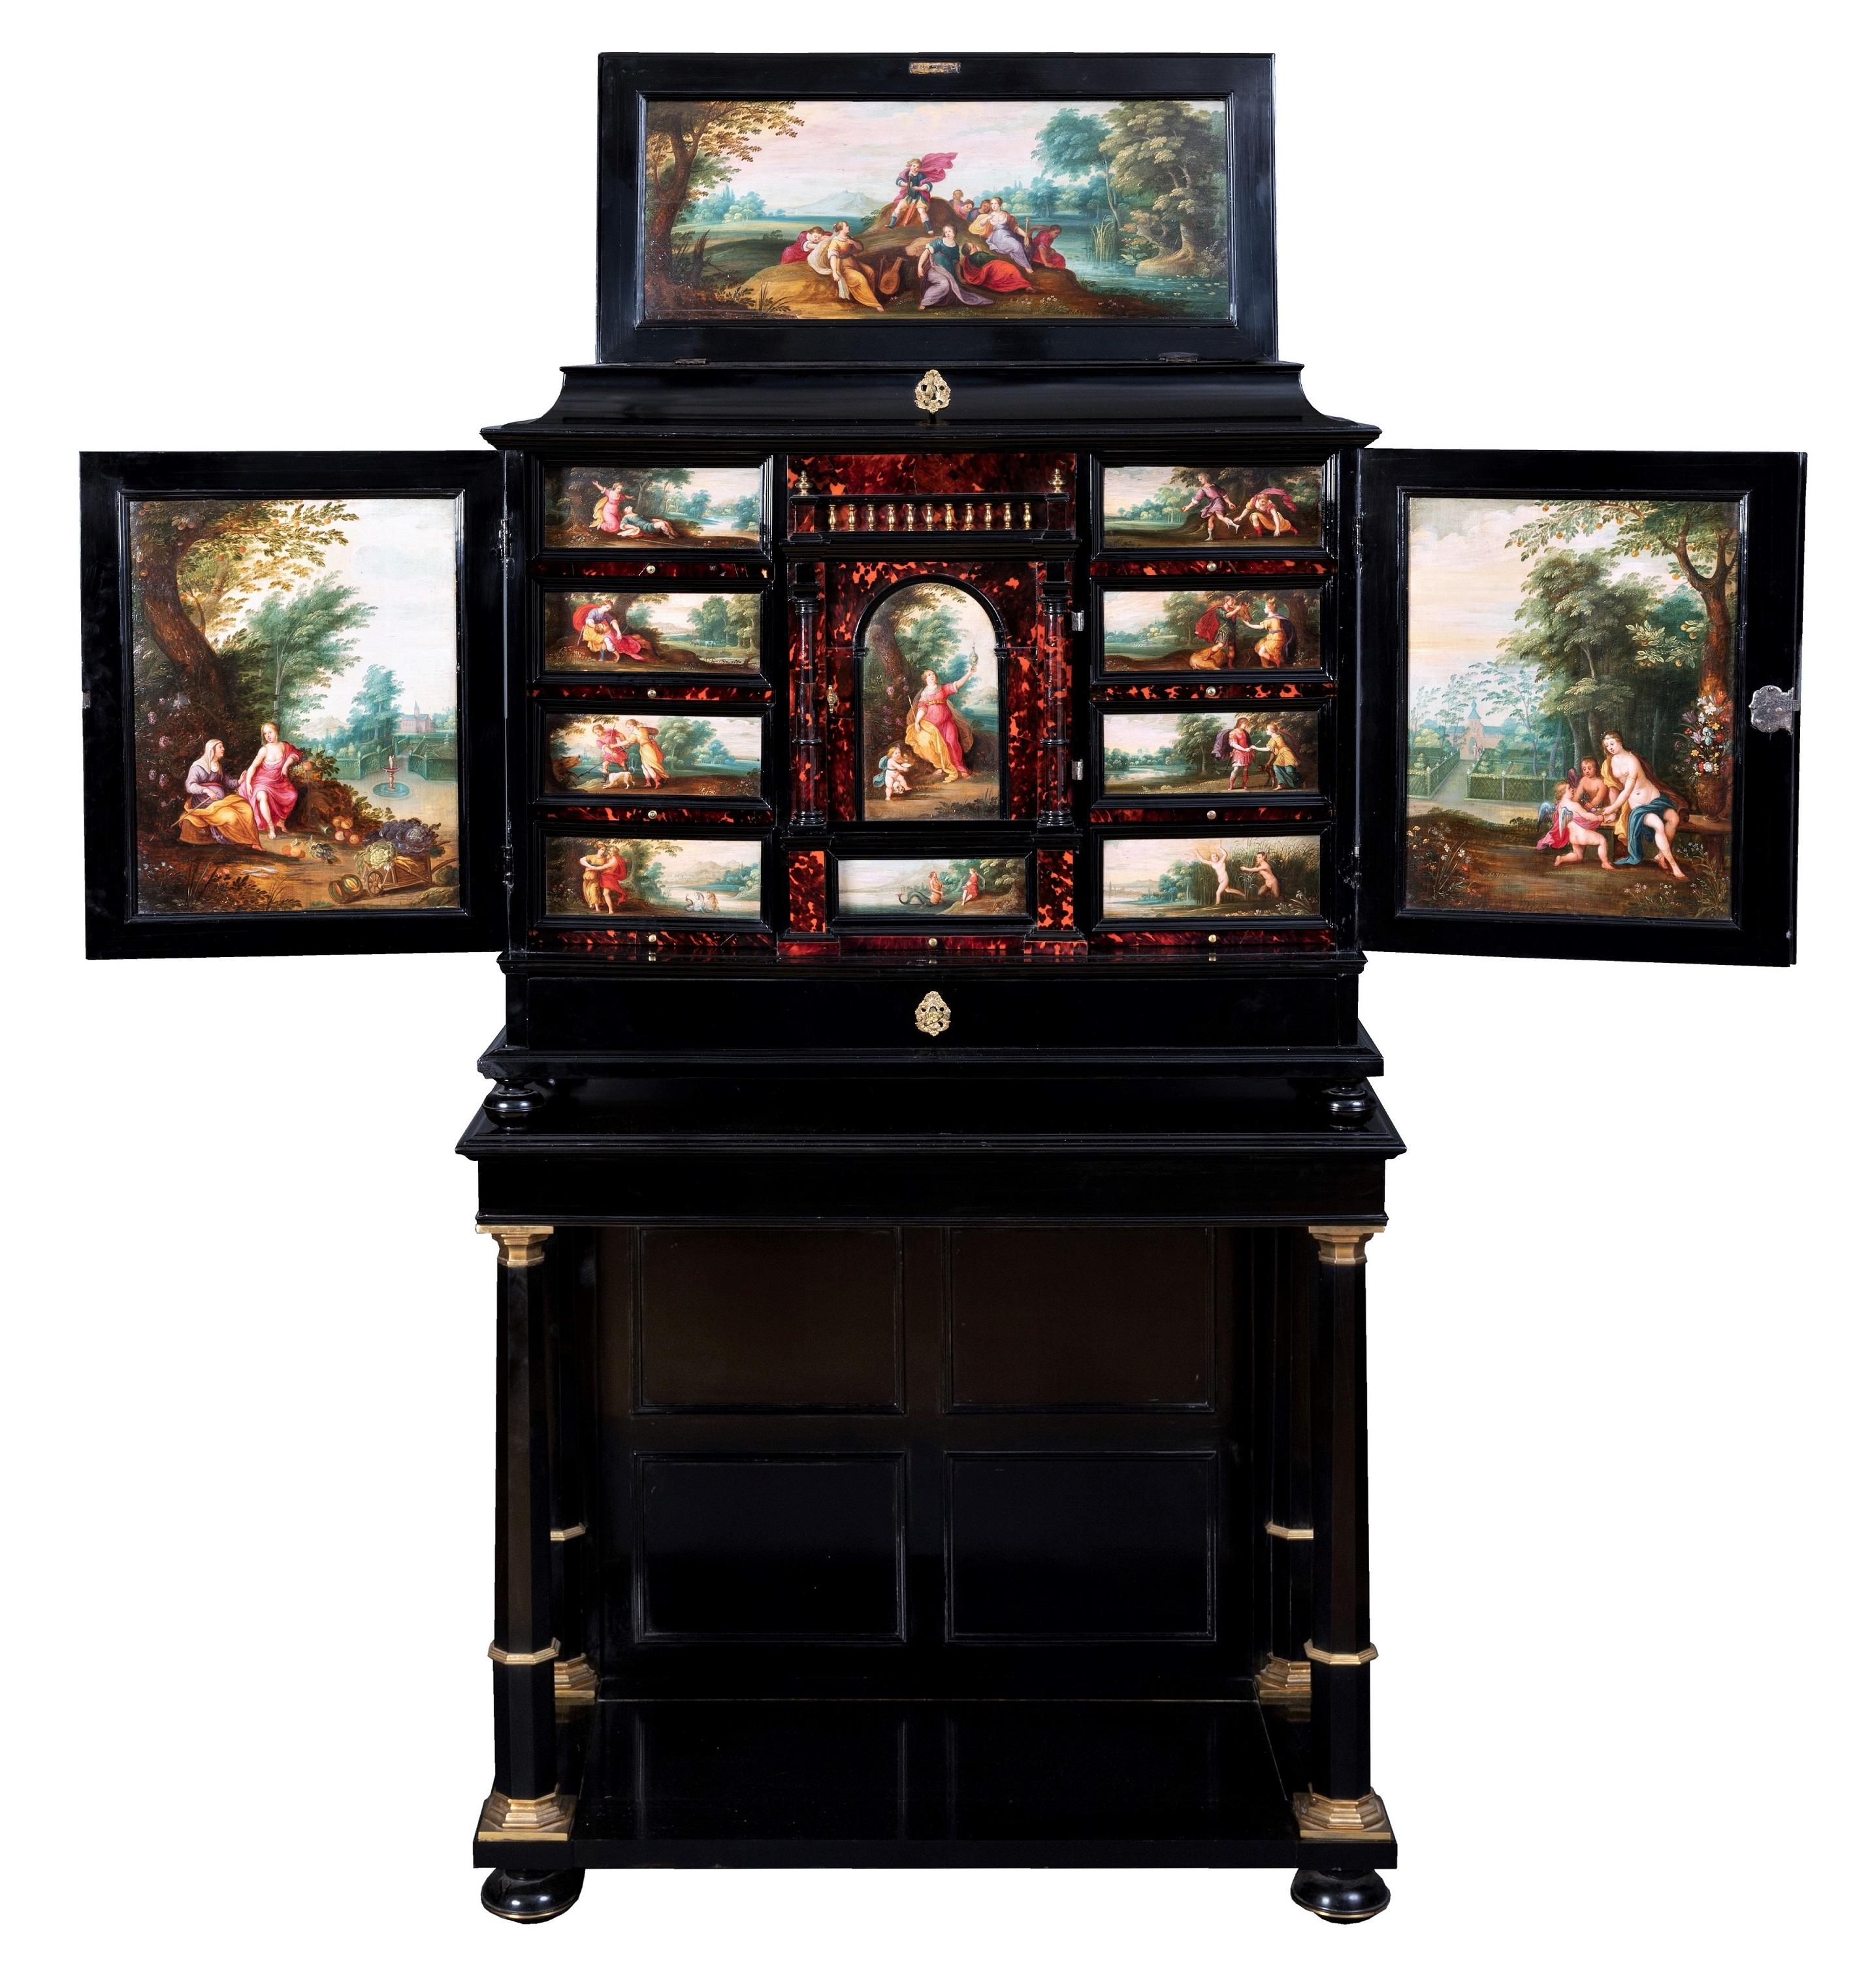 This precious cabinet is one of the rare emblematic works of the city of Antwerp, produced in 17th century thanks to the collaboration between a painter and a cabinetmaker, and intended to adorn Kunstkammer (private museums) or art cabinets.
Our